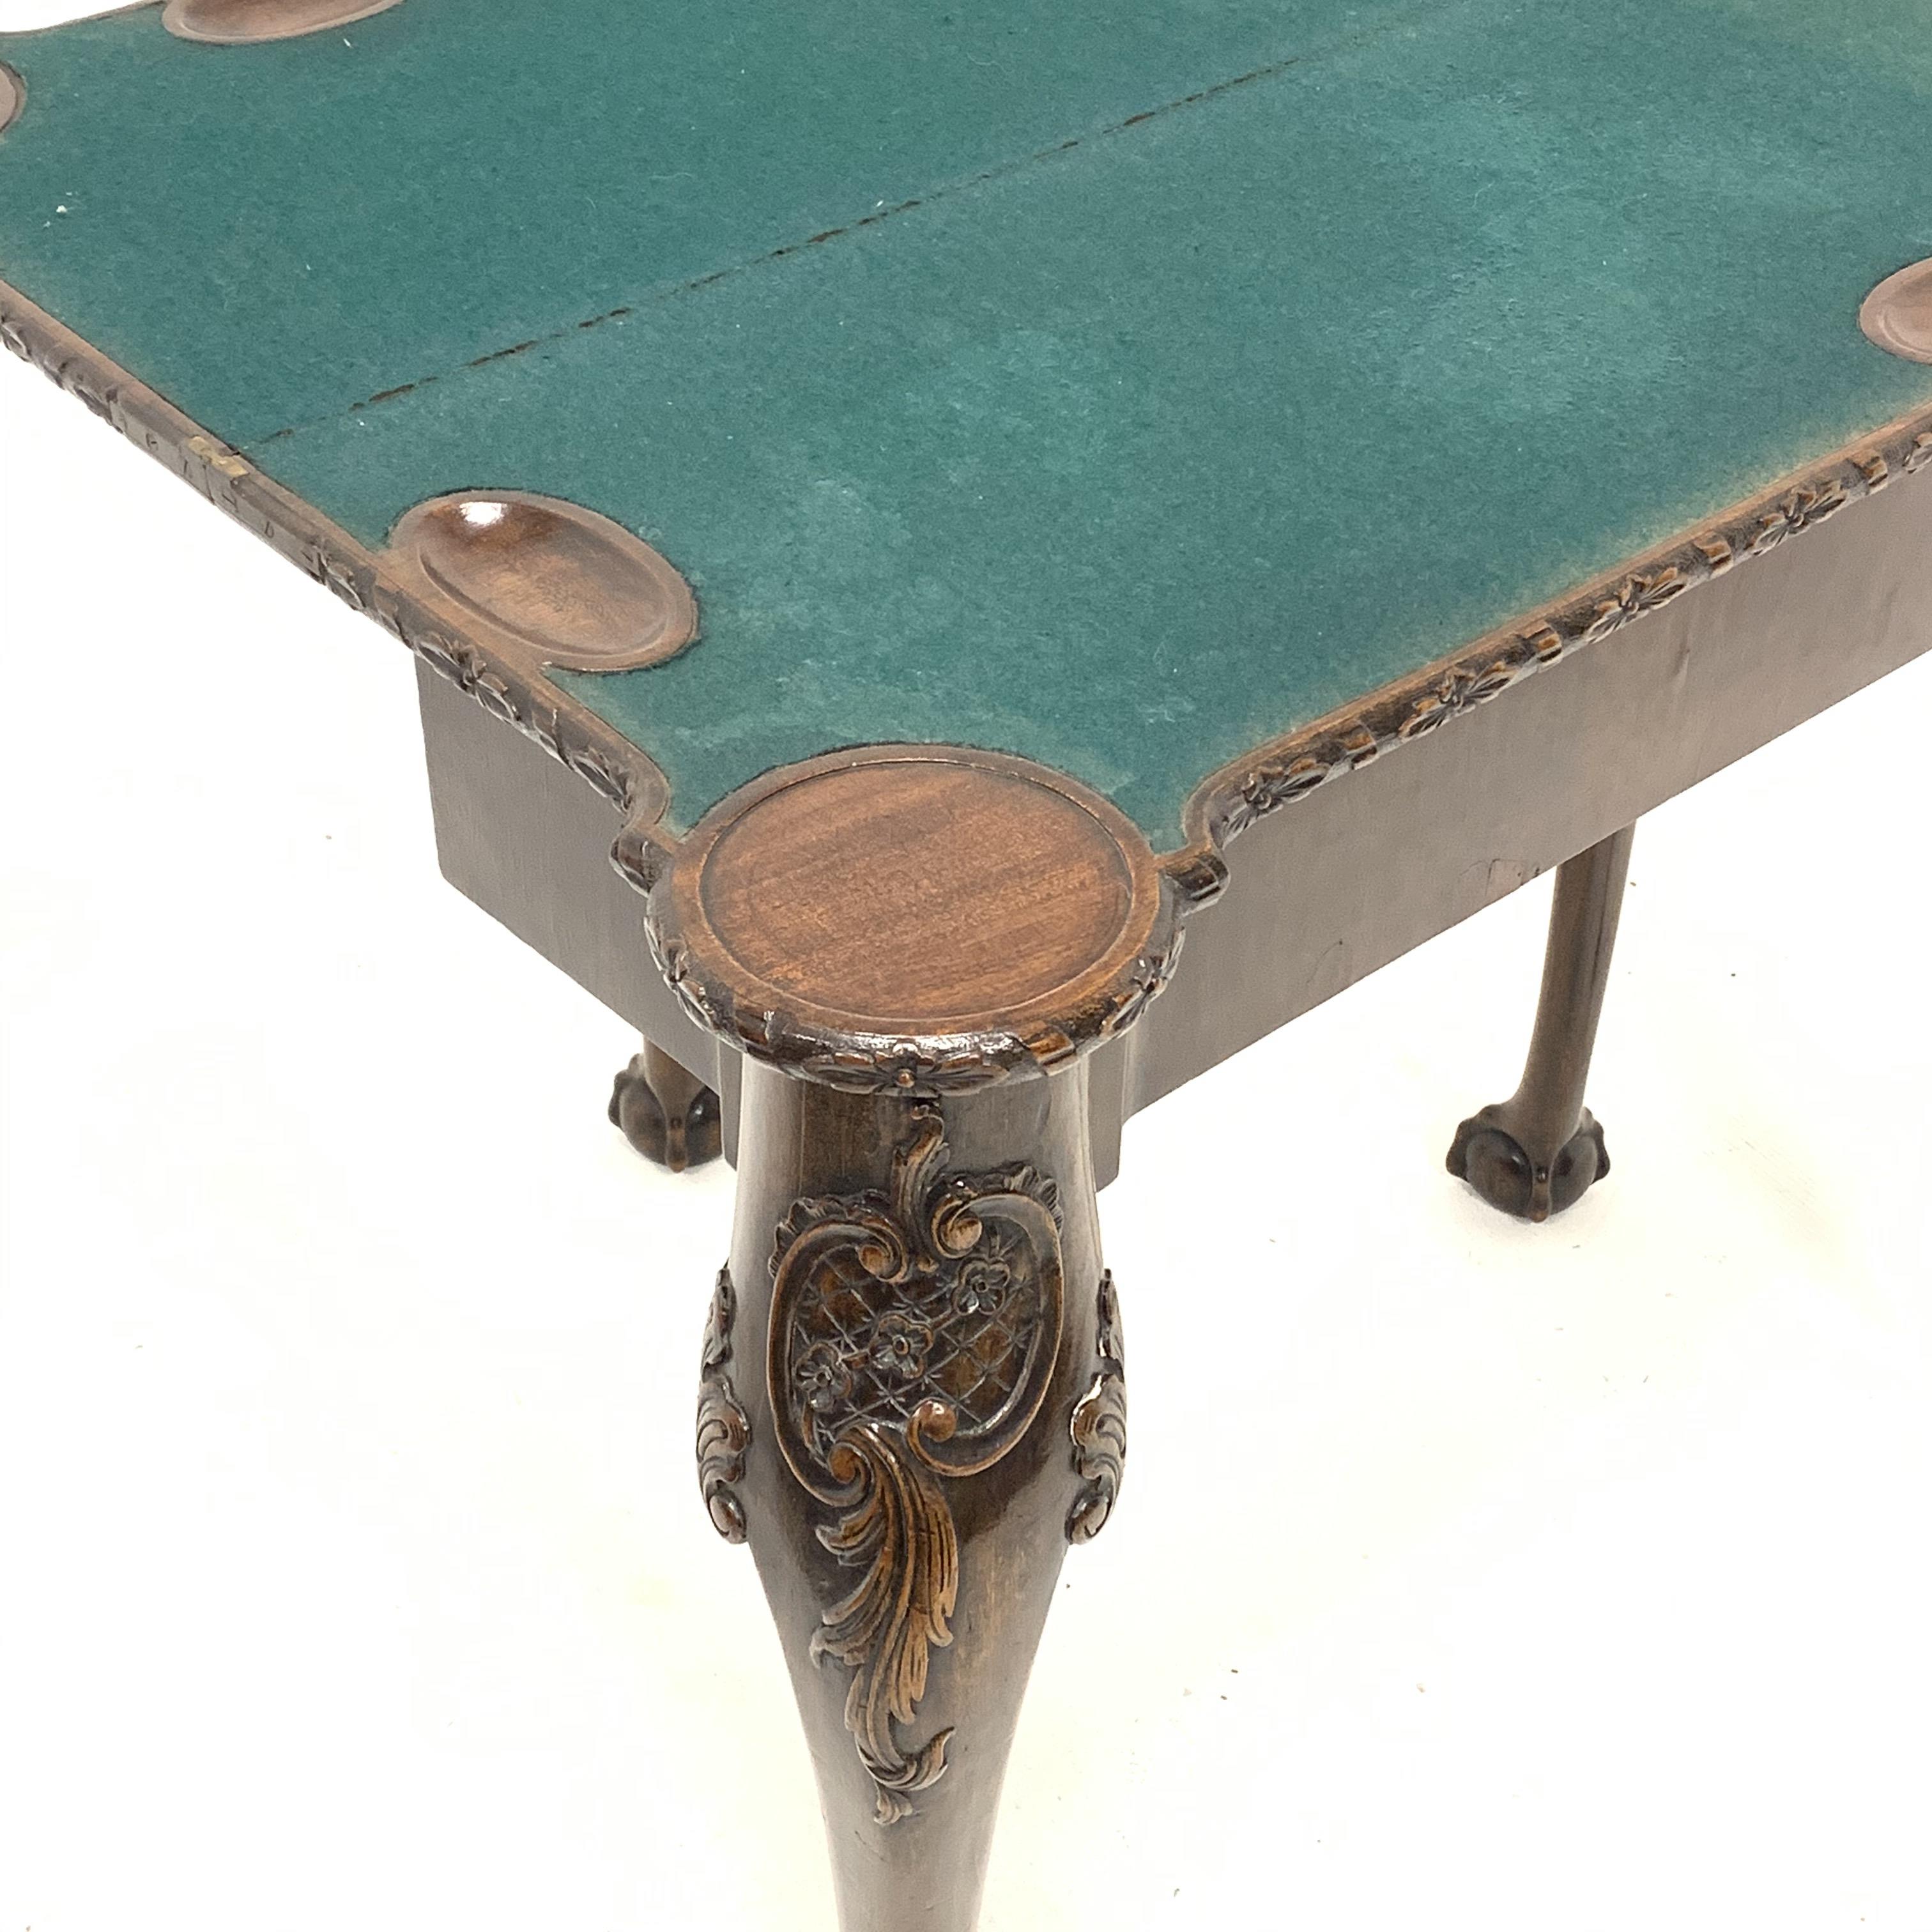 Early 20th century mahogany Georgian style games table, the shaped folder top with baize lining - Image 4 of 5